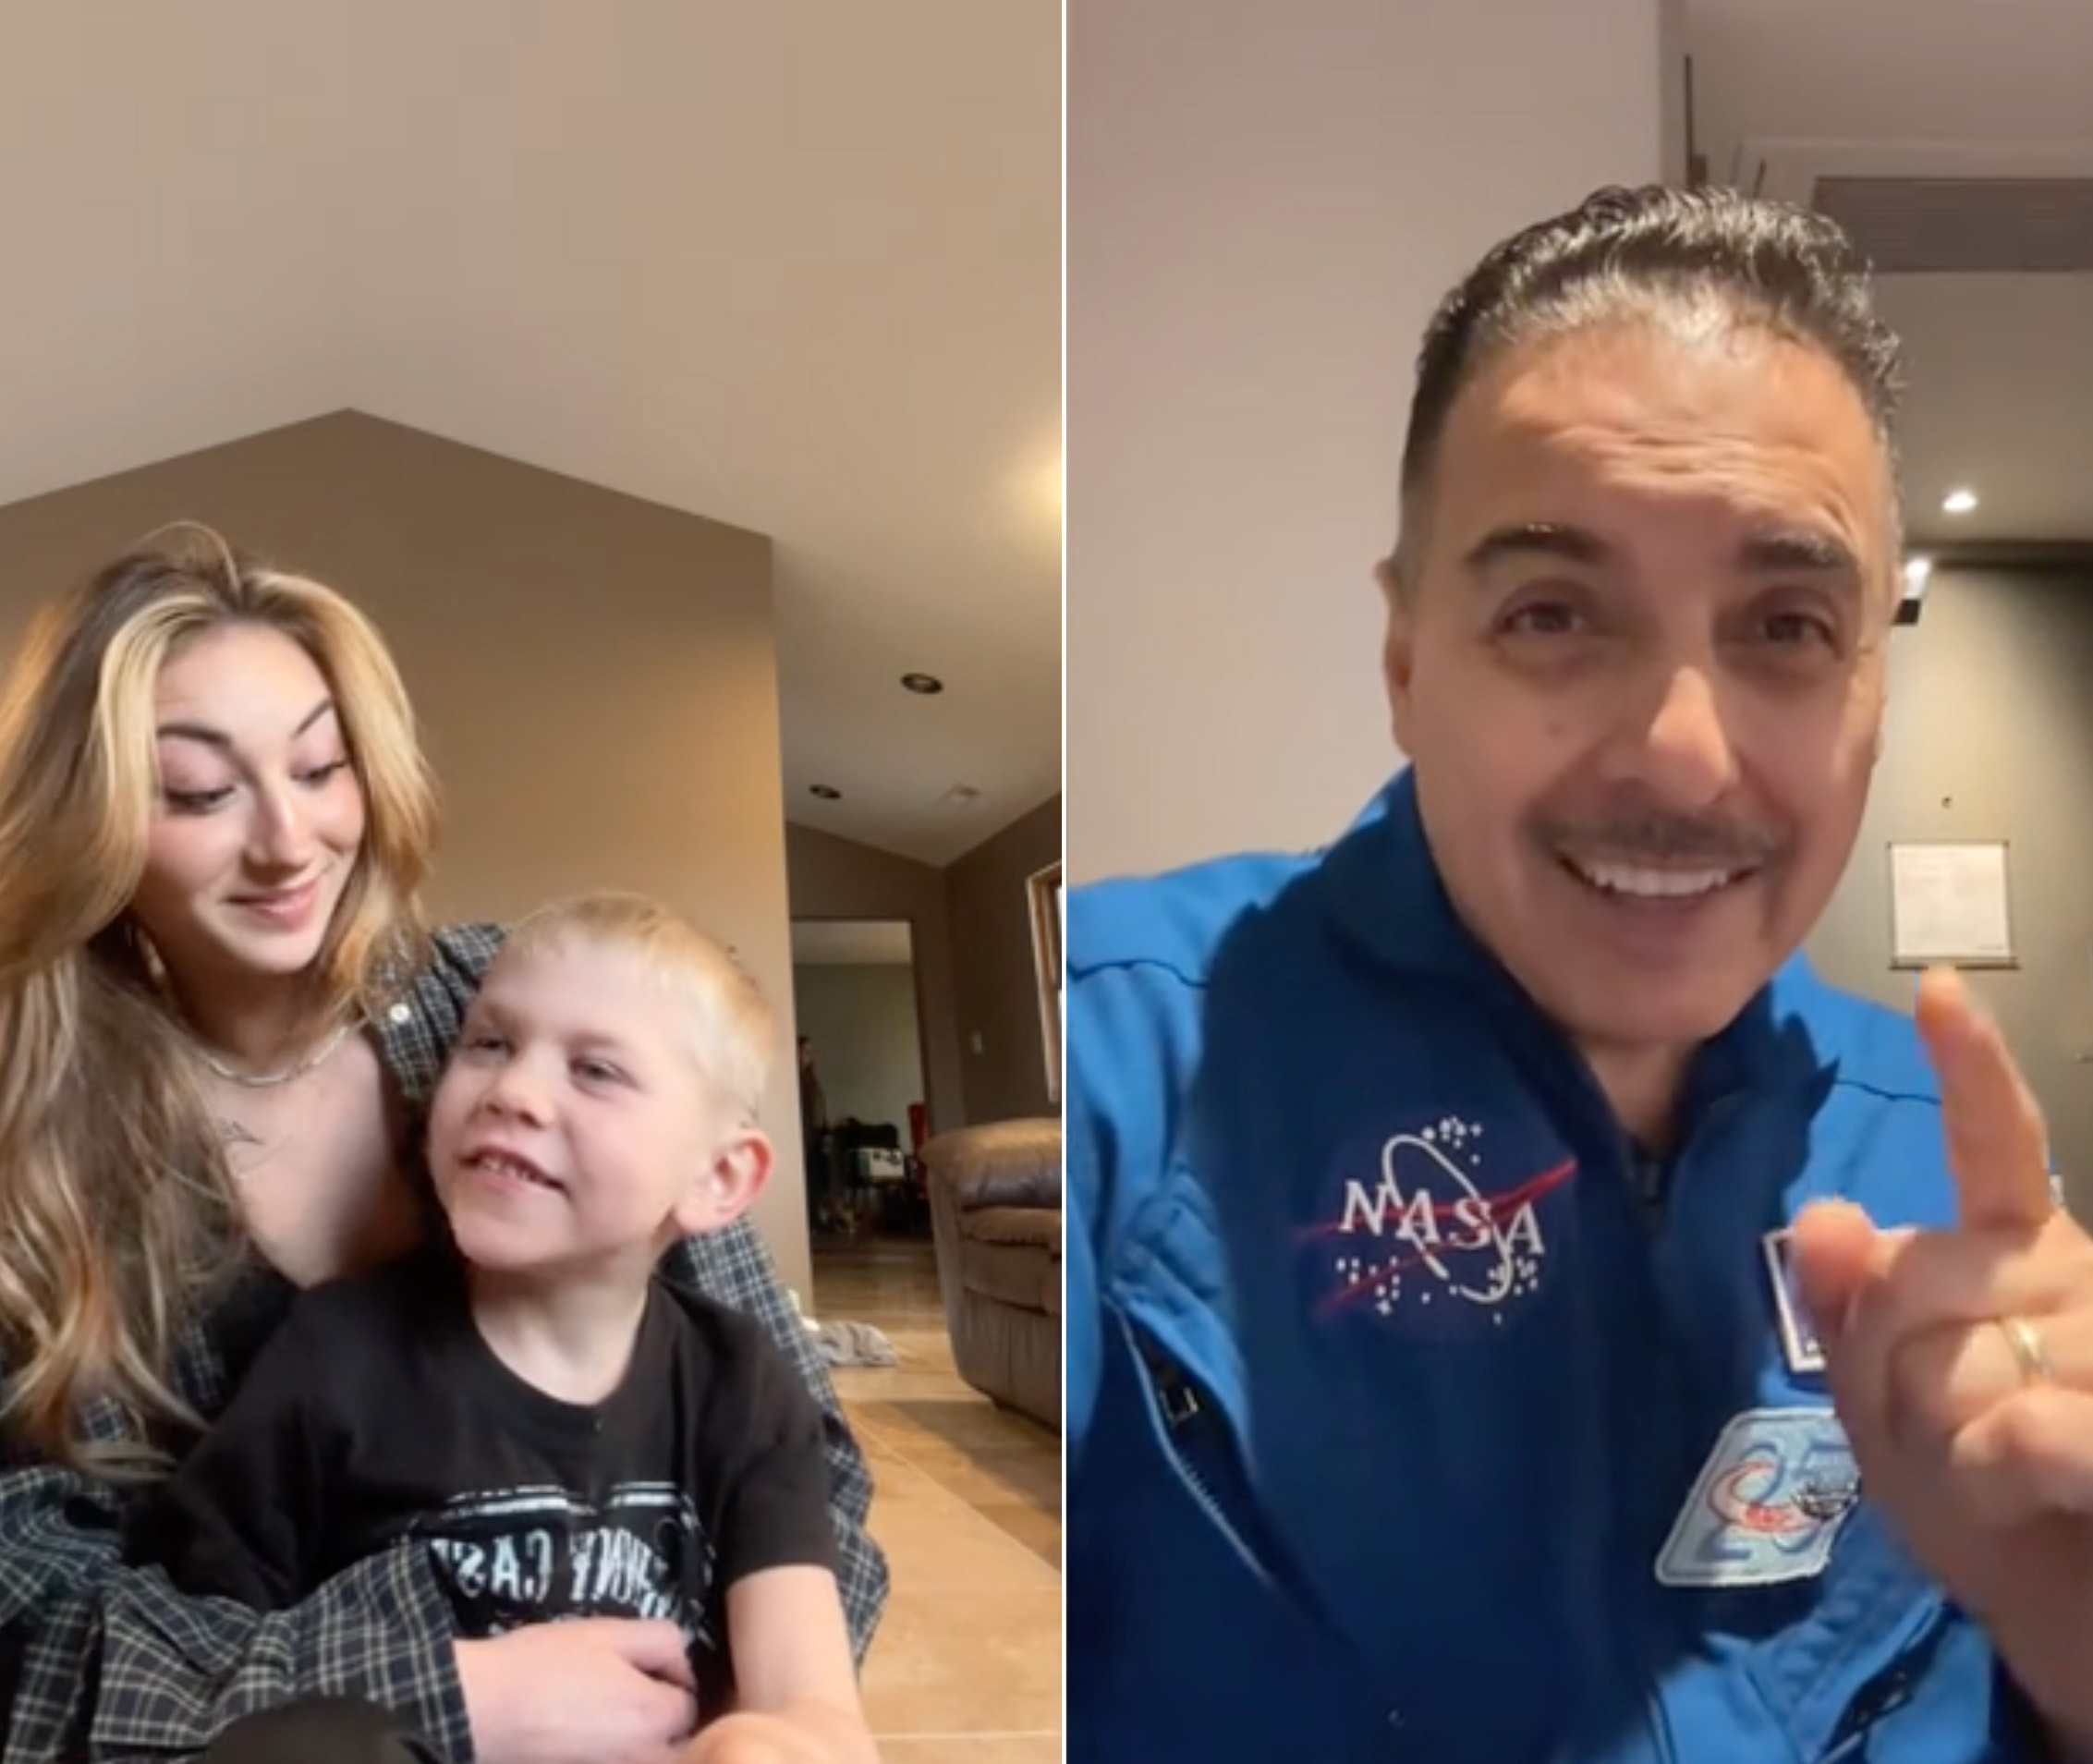 6-Year-Old Bullied At School For His Interest In Space Gets A Sweet Message From NASA Astronaut